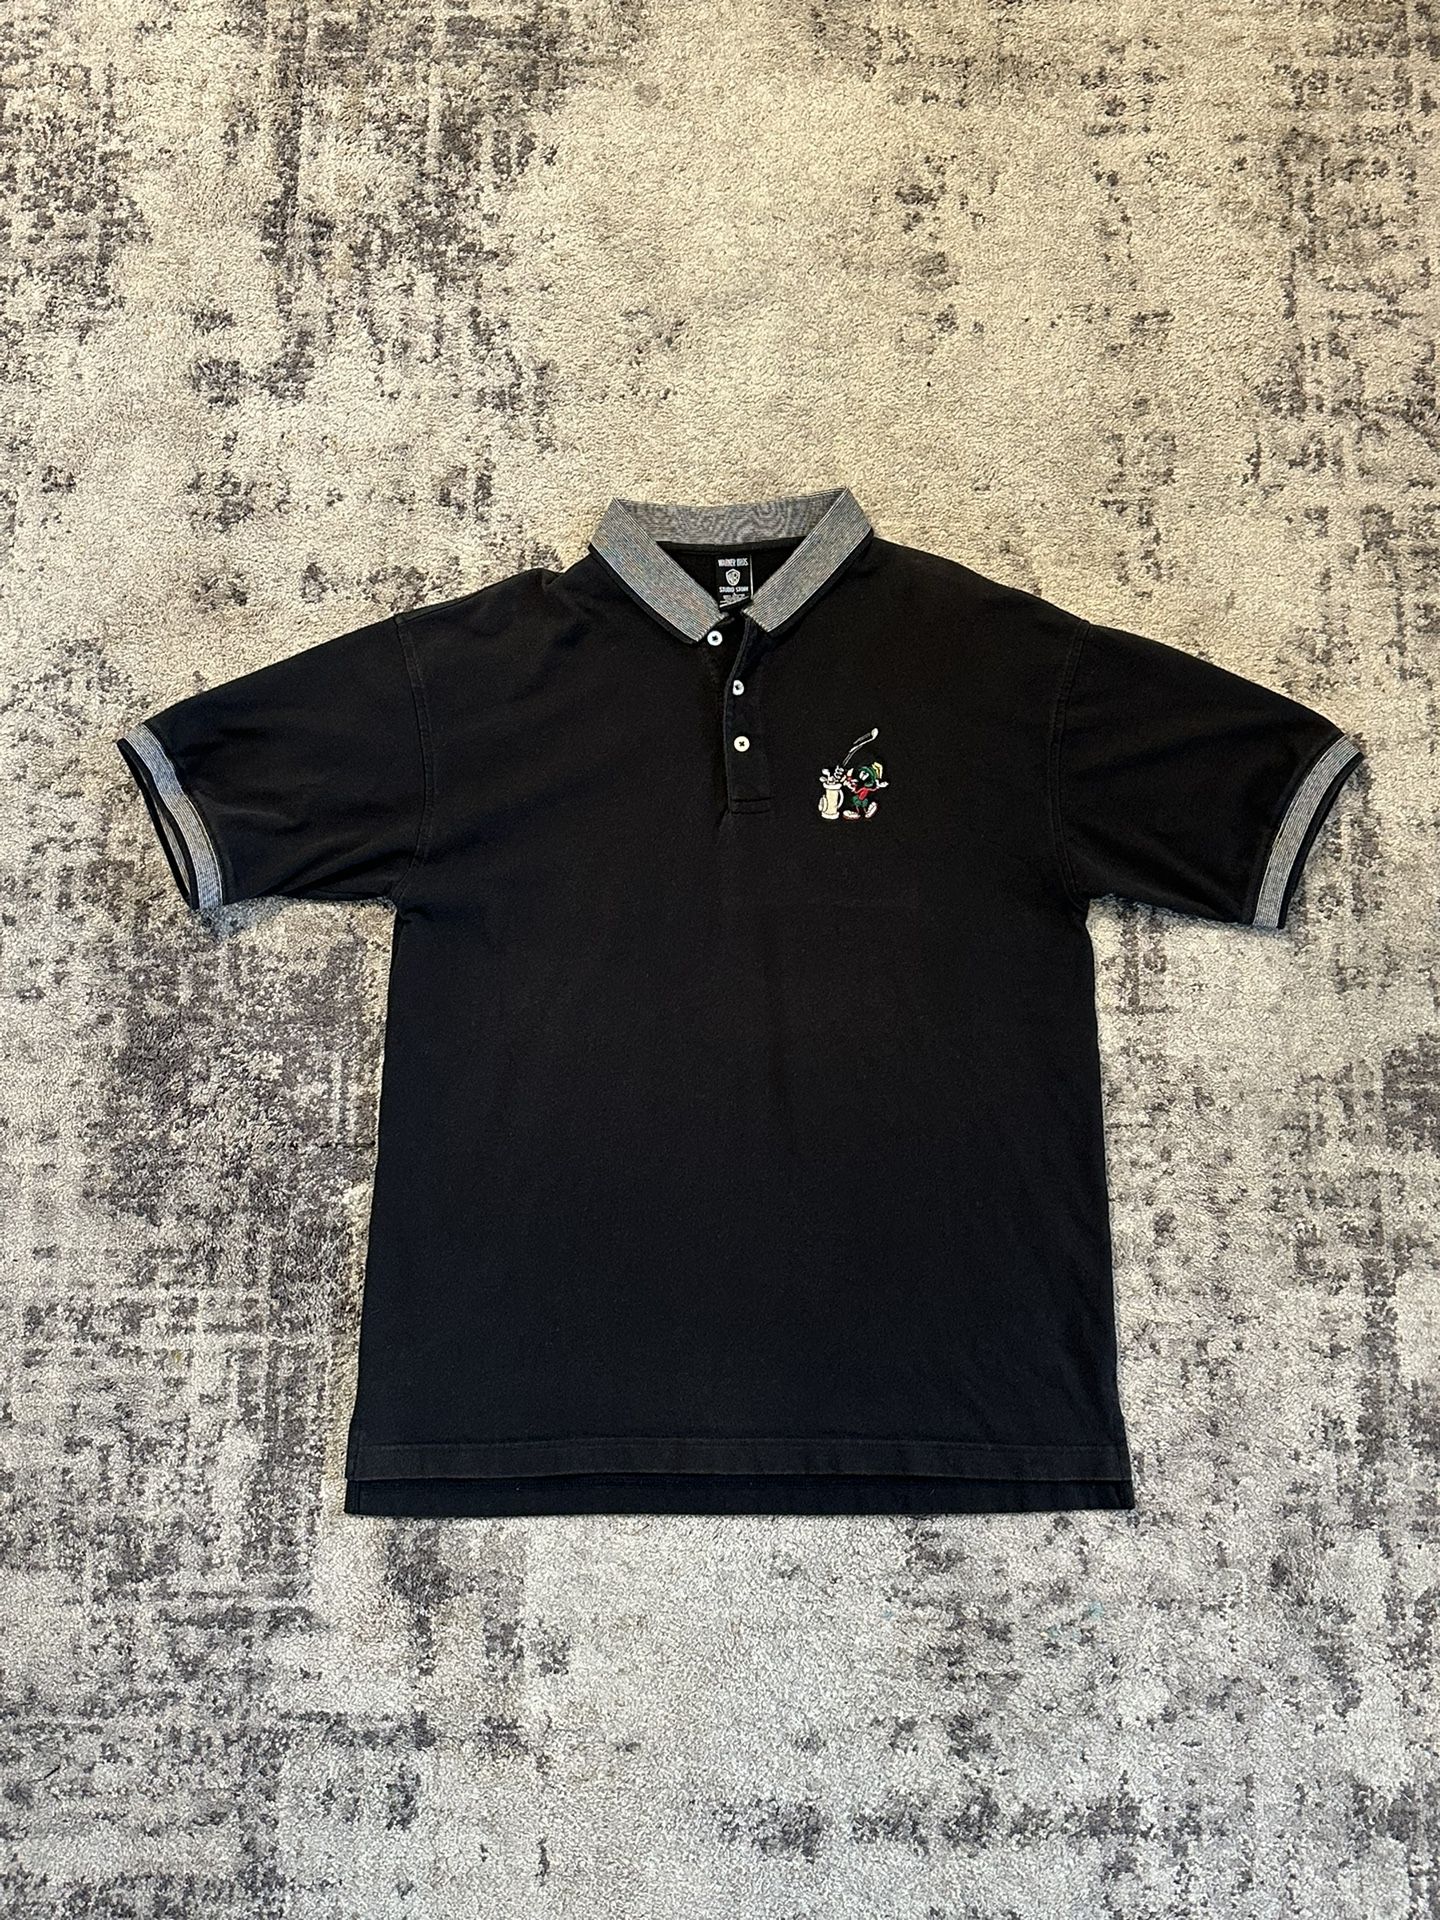 1998 Warner Bros Studio Store Looney Tunes Marvin the Martian Golf Clubs Polo Shirt size Large